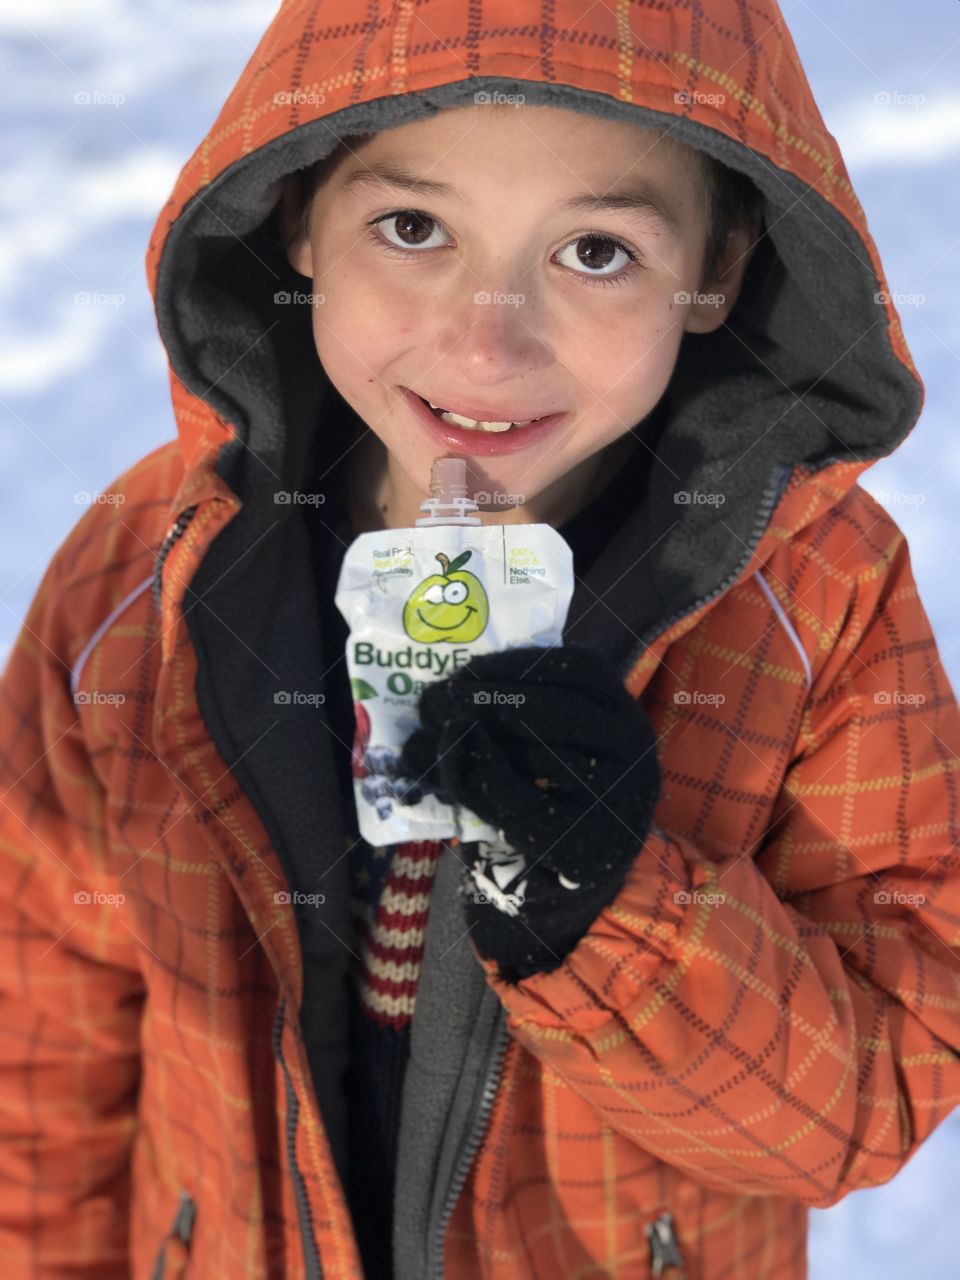 Buddy fruits and snow